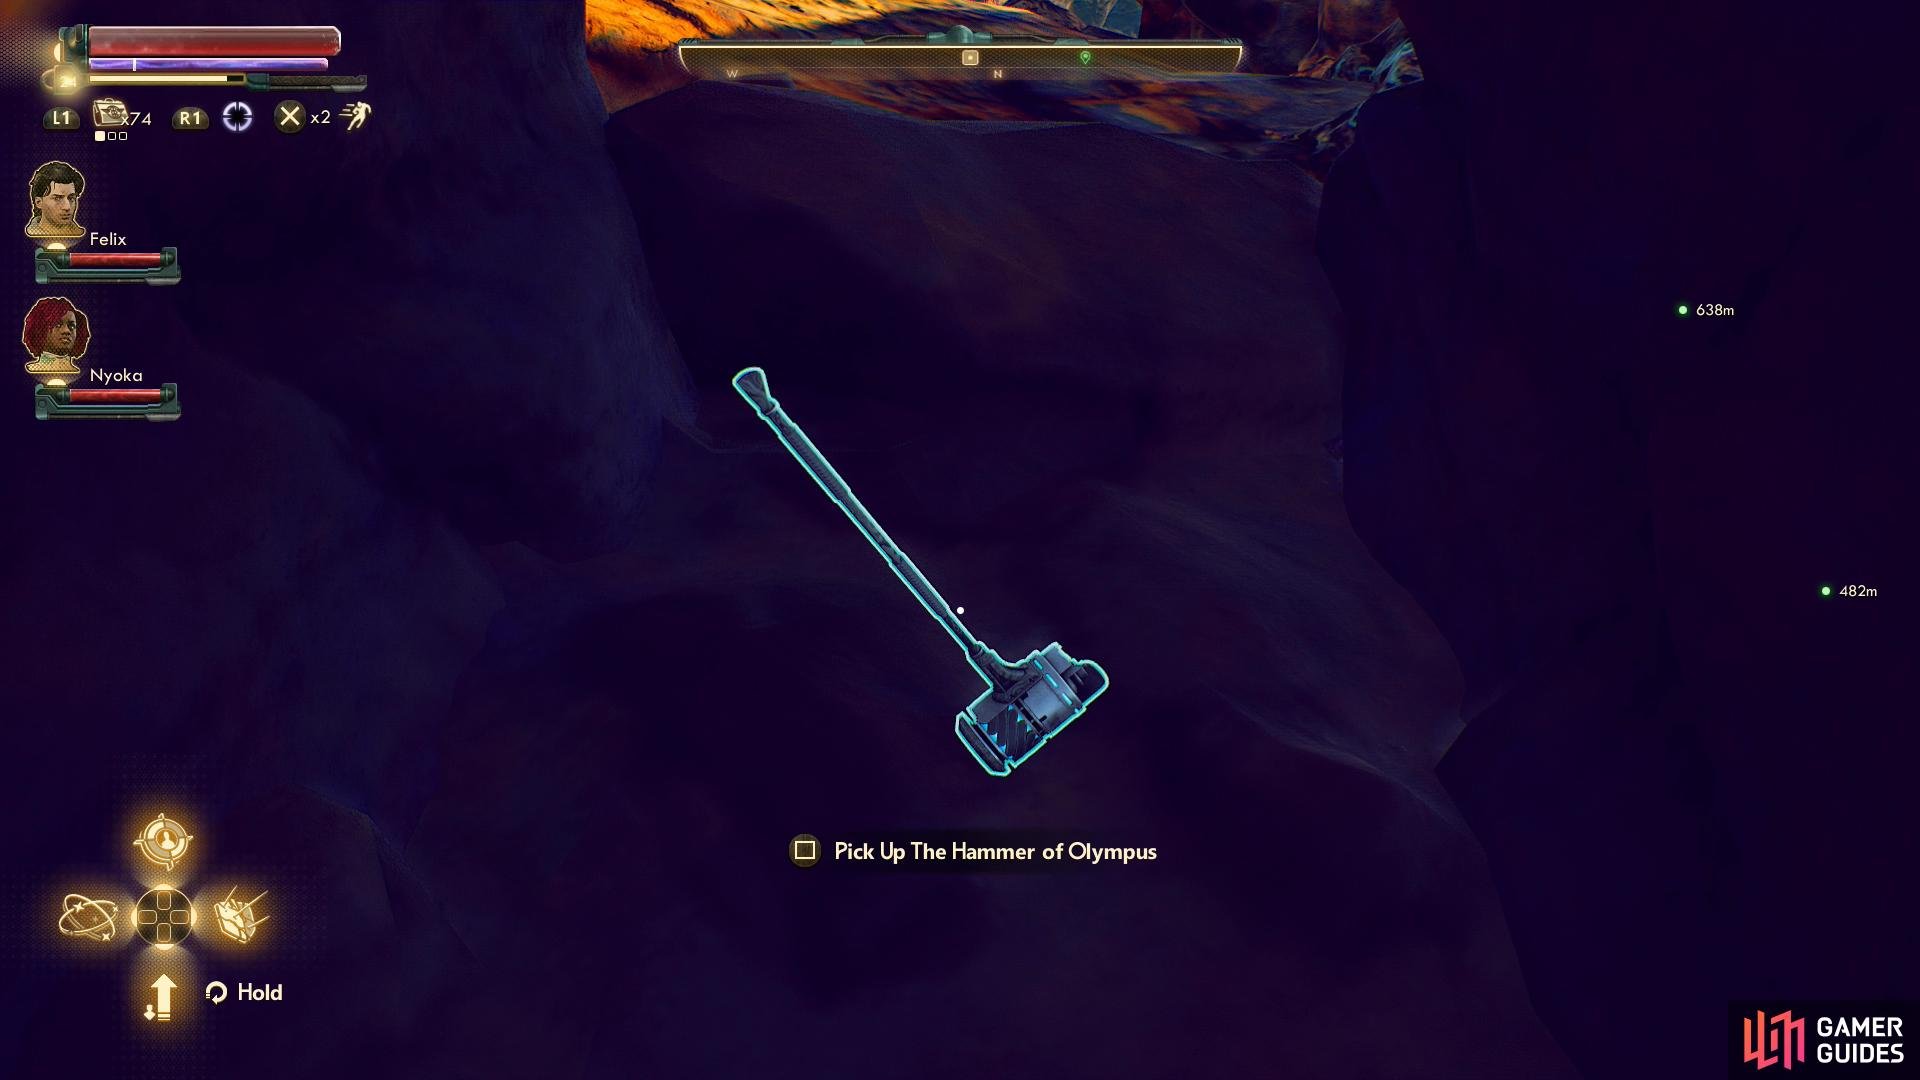 In the mountain paths this route leads to you can also find the Sundered Rock location, where The Hammer of Olympus can be claimed.